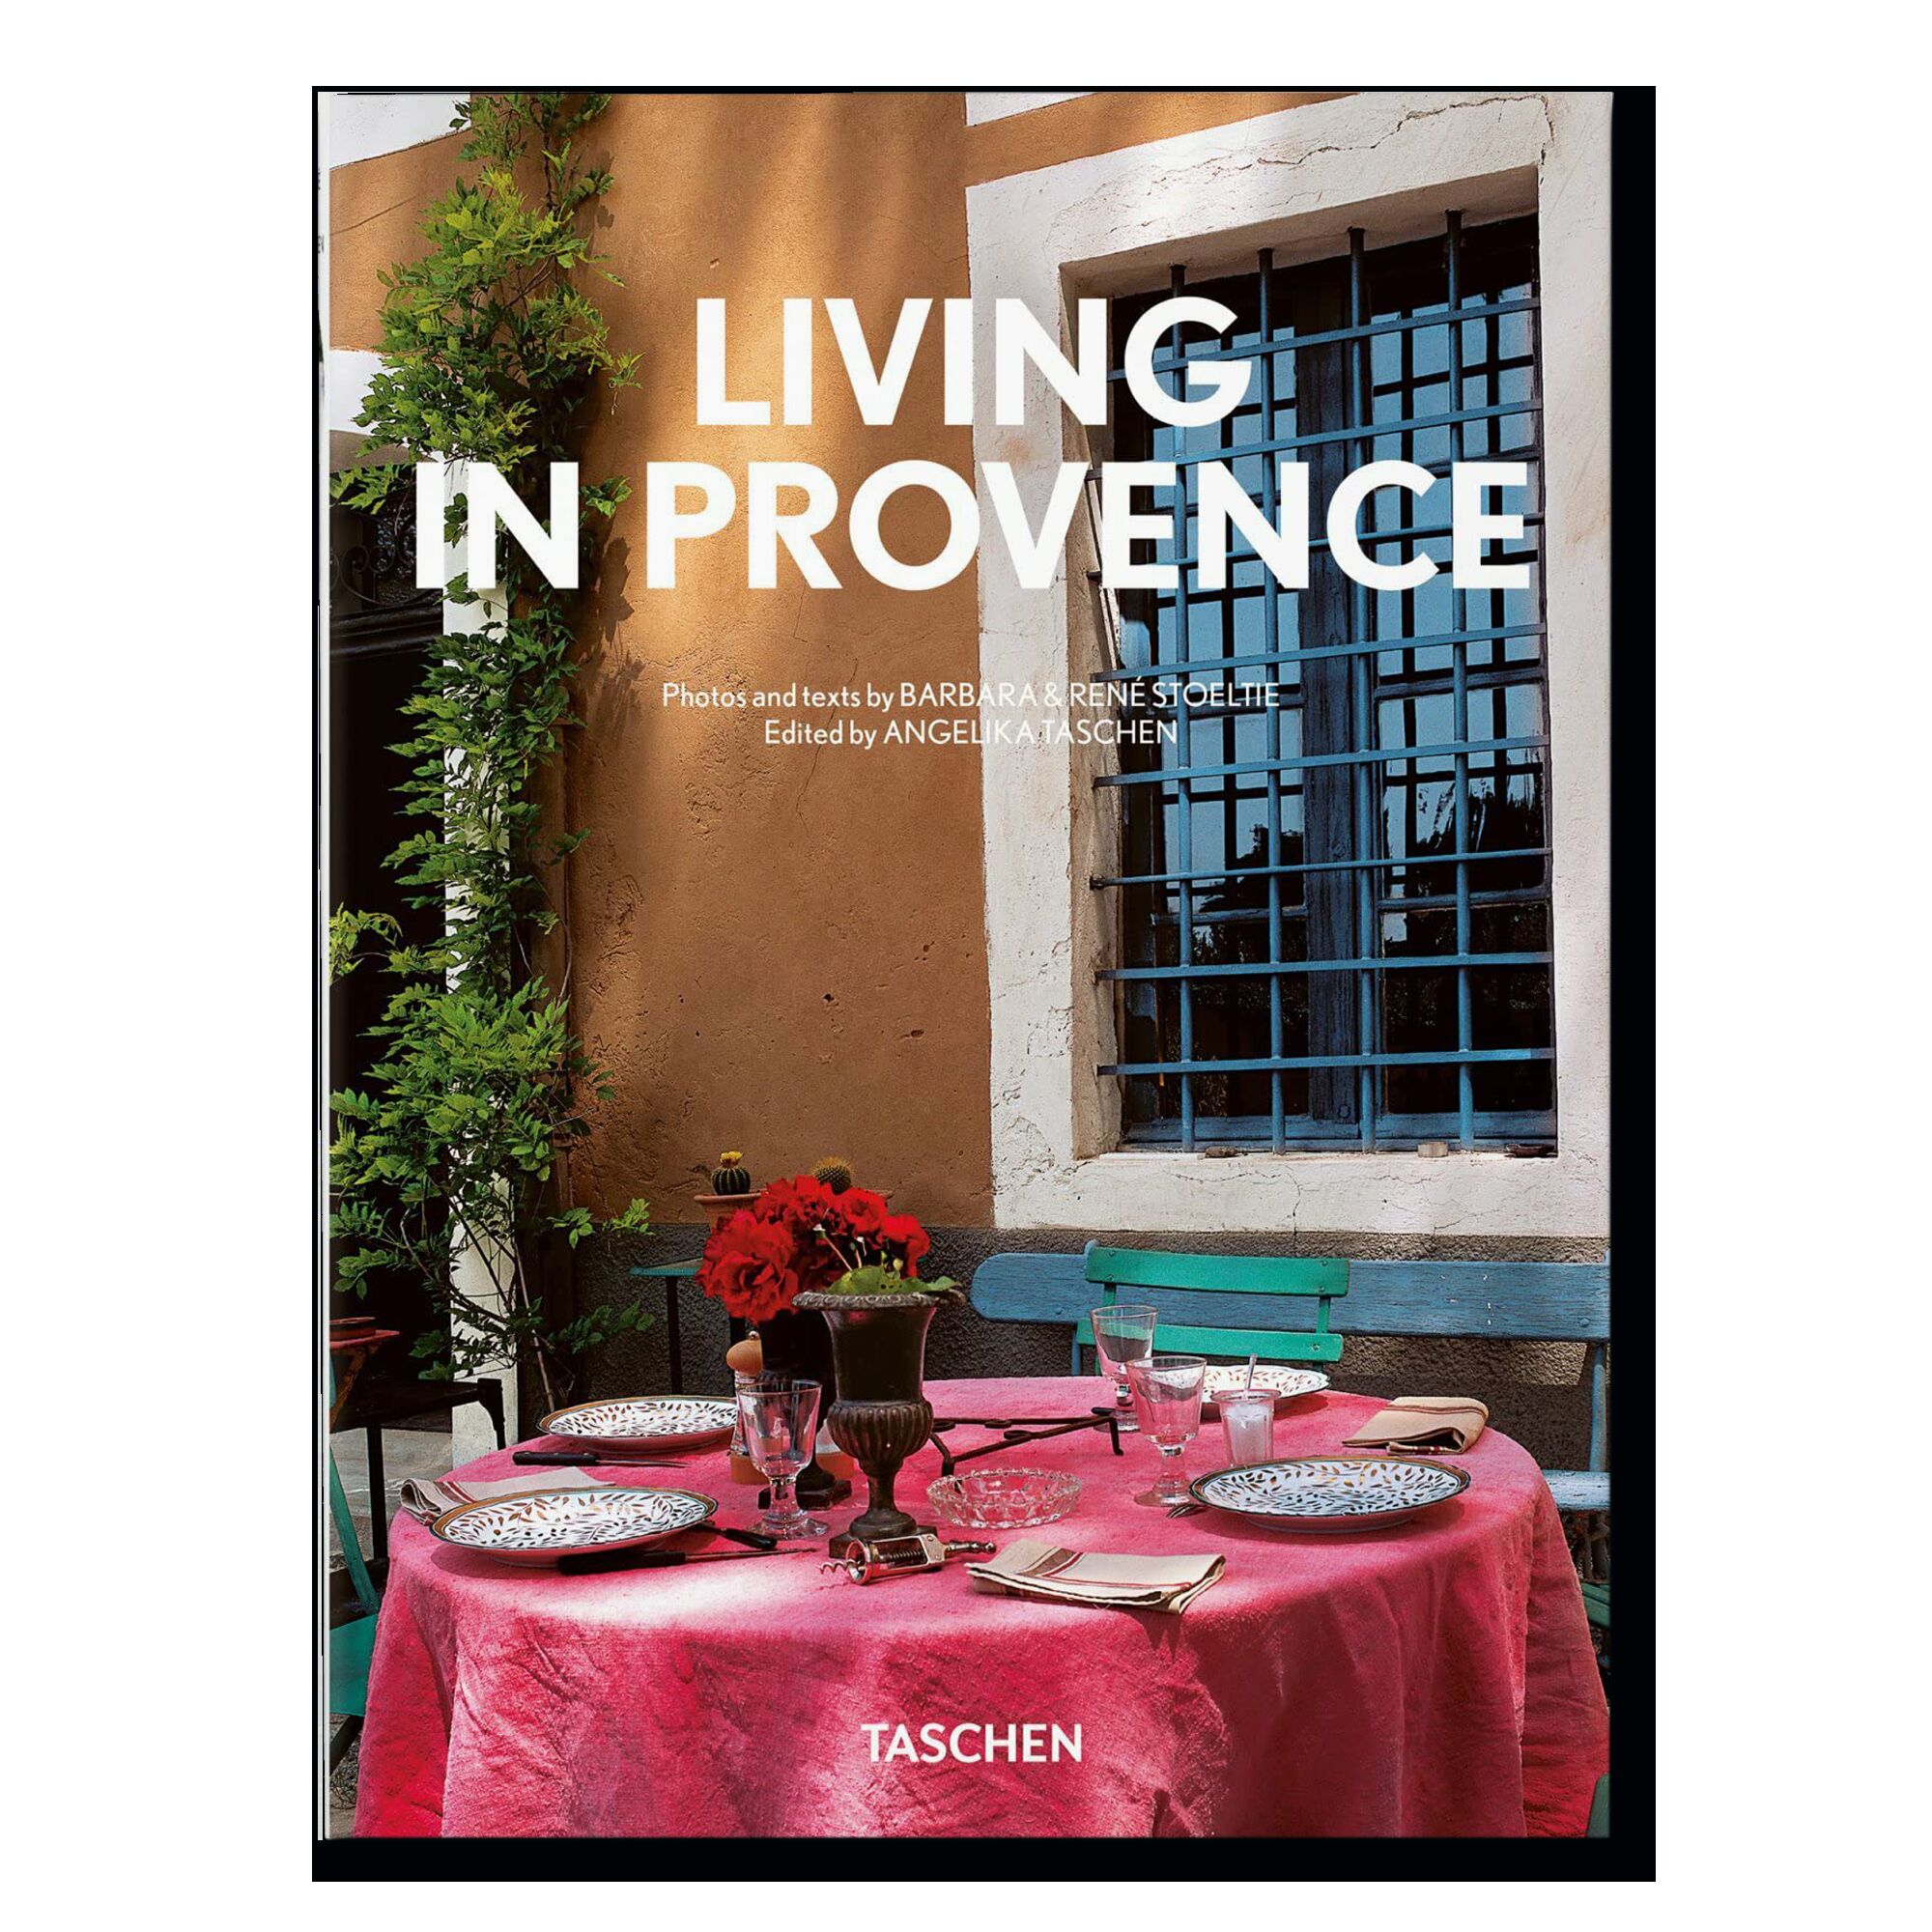 Living in Provence (40th Anniversary Edition)